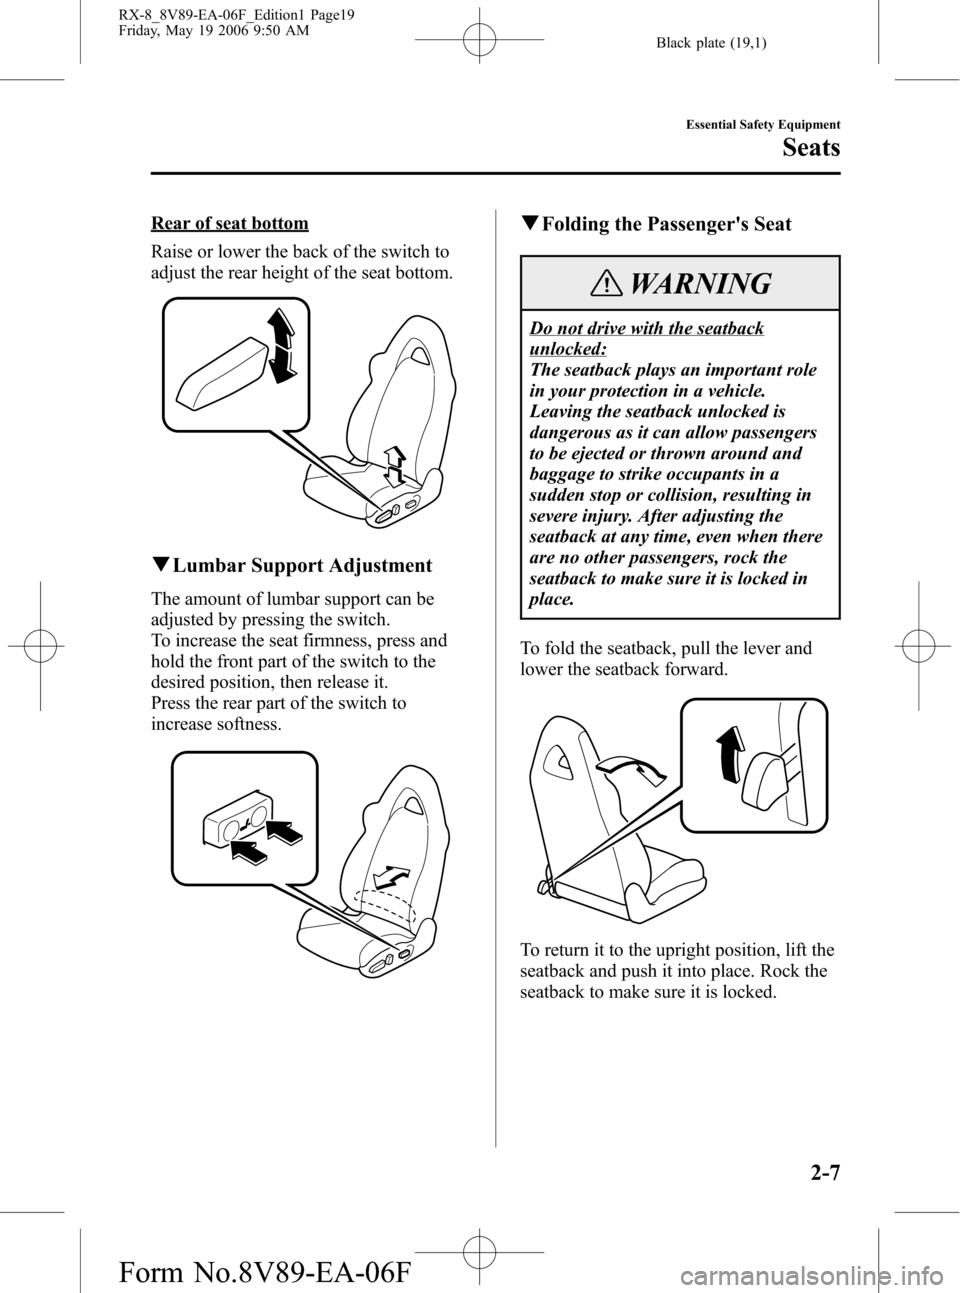 MAZDA MODEL RX 8 2007  Owners Manual (in English) Black plate (19,1)
Rear of seat bottom
Raise or lower the back of the switch to
adjust the rear height of the seat bottom.
qLumbar Support Adjustment
The amount of lumbar support can be
adjusted by pr